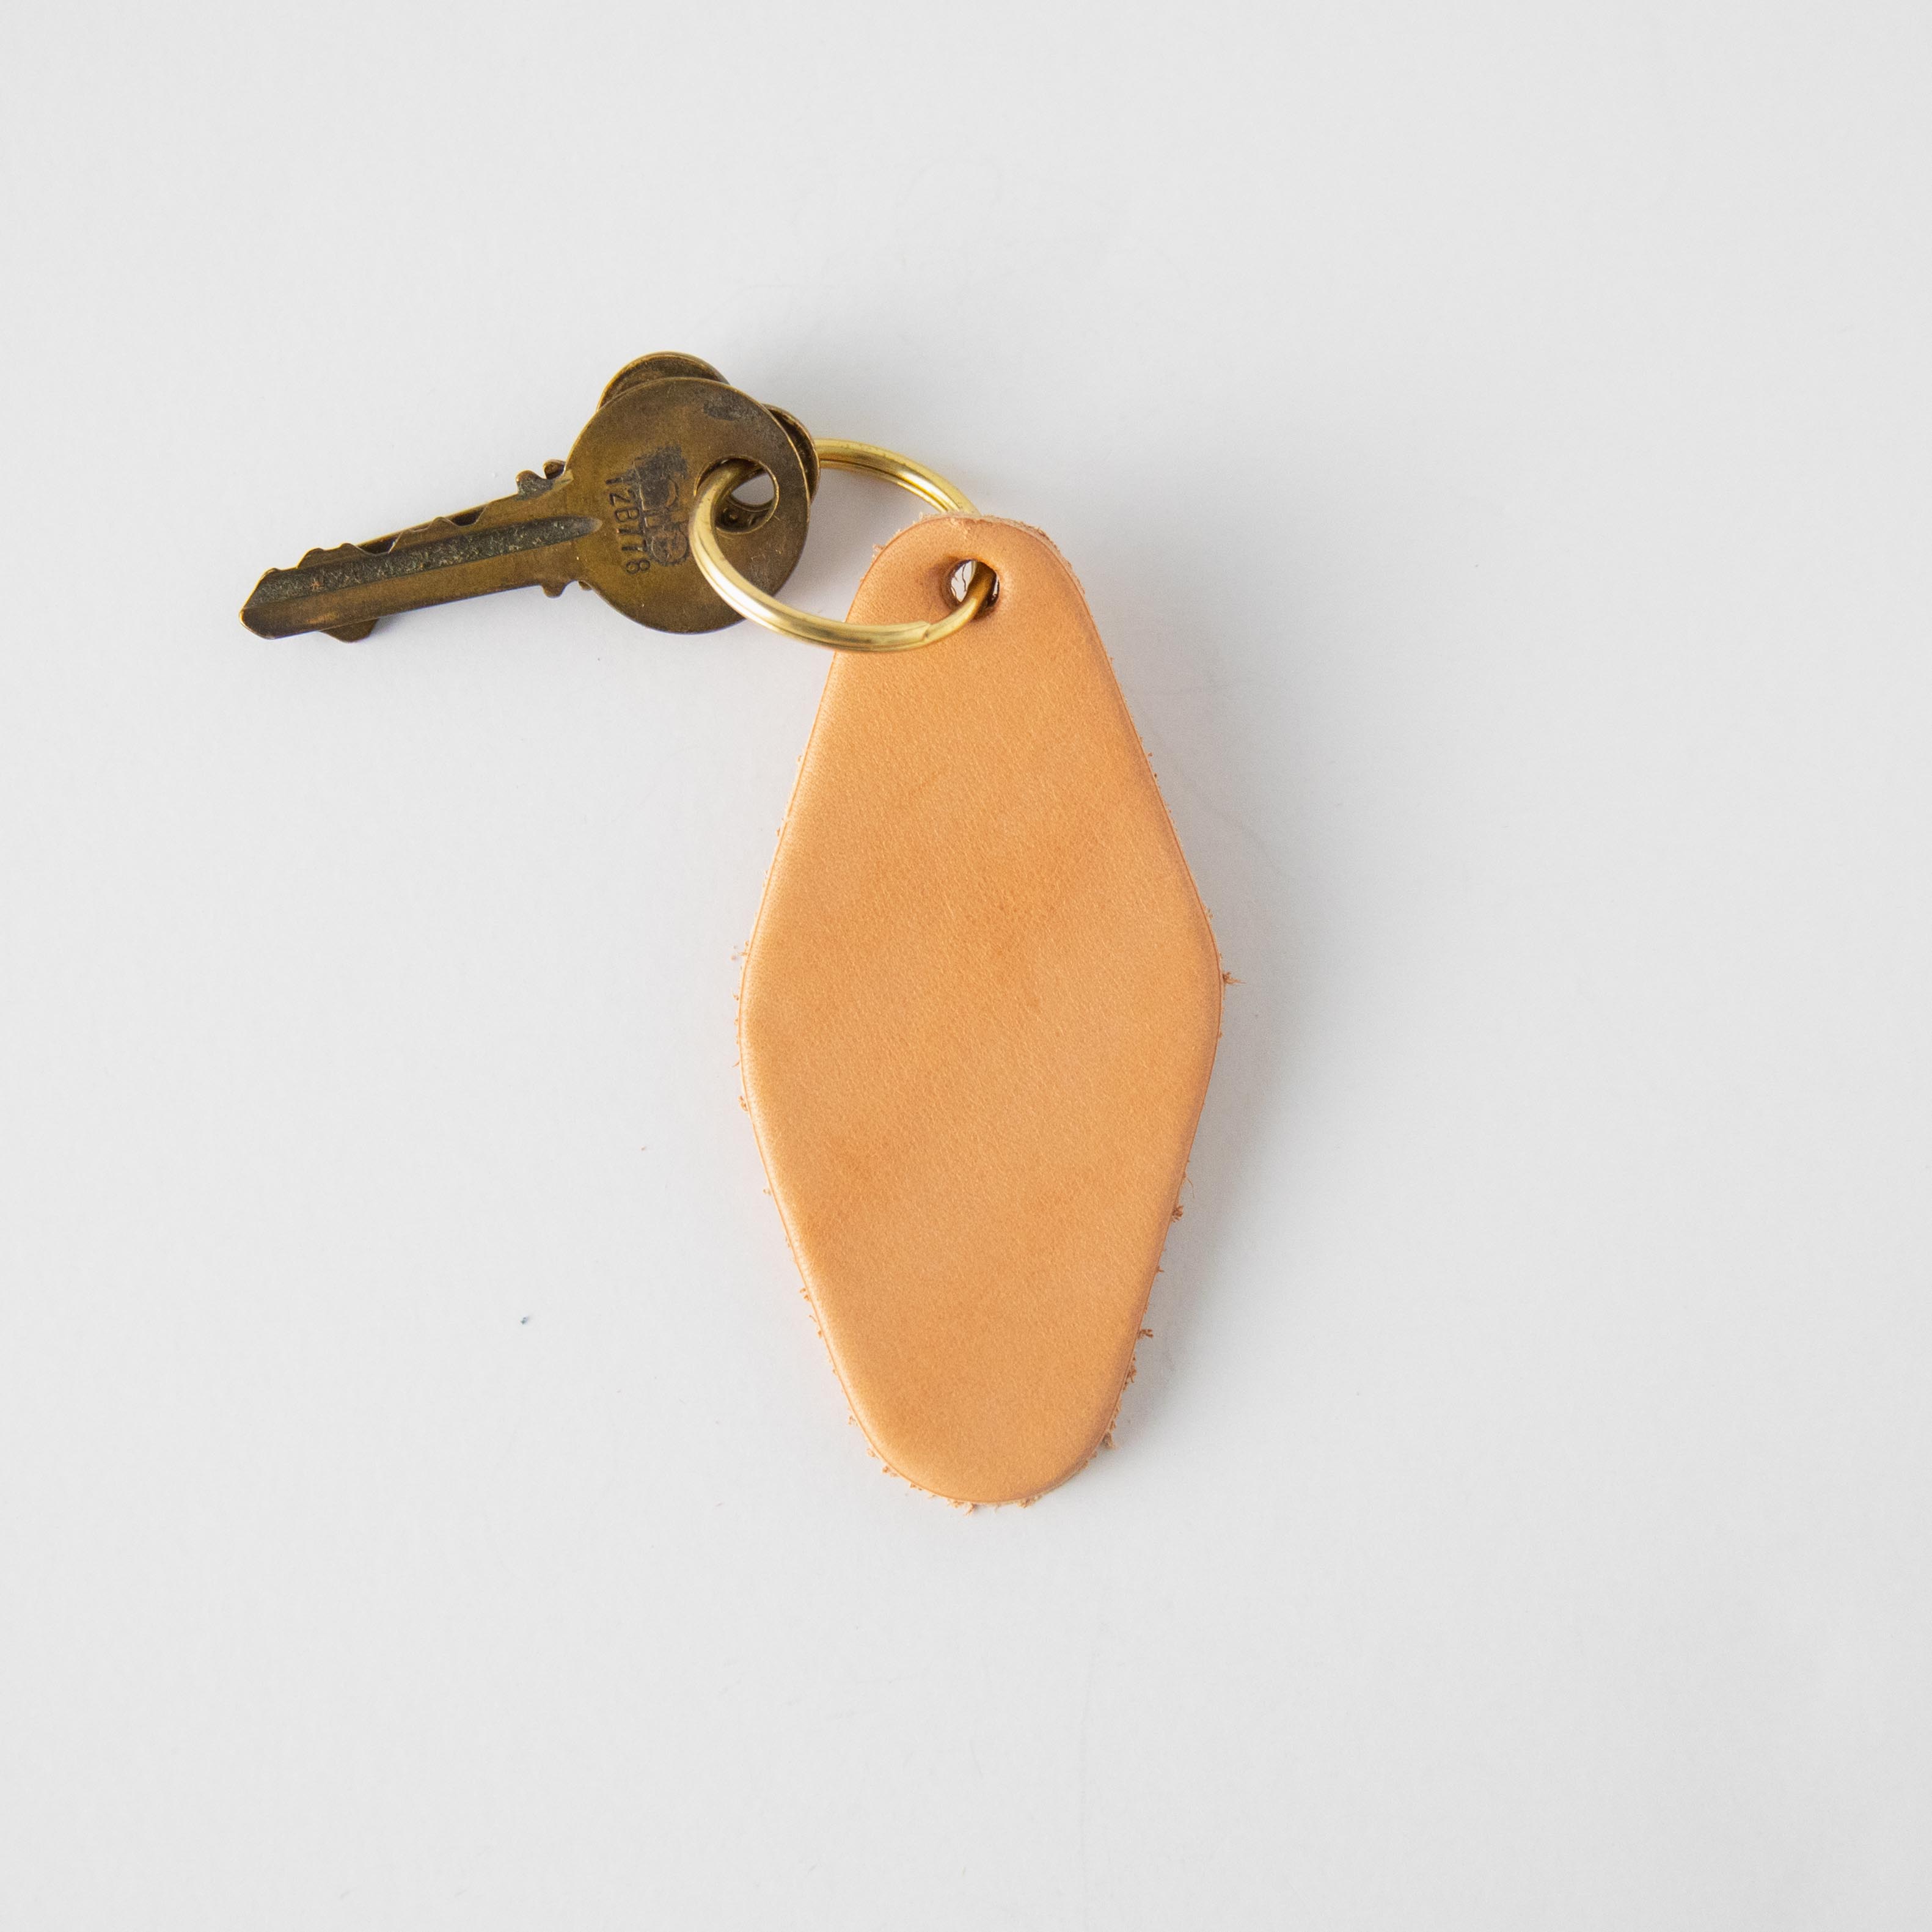 Leather Keychains: Yellow Key Lanyard | Leather Keychains by KMM & Co. No